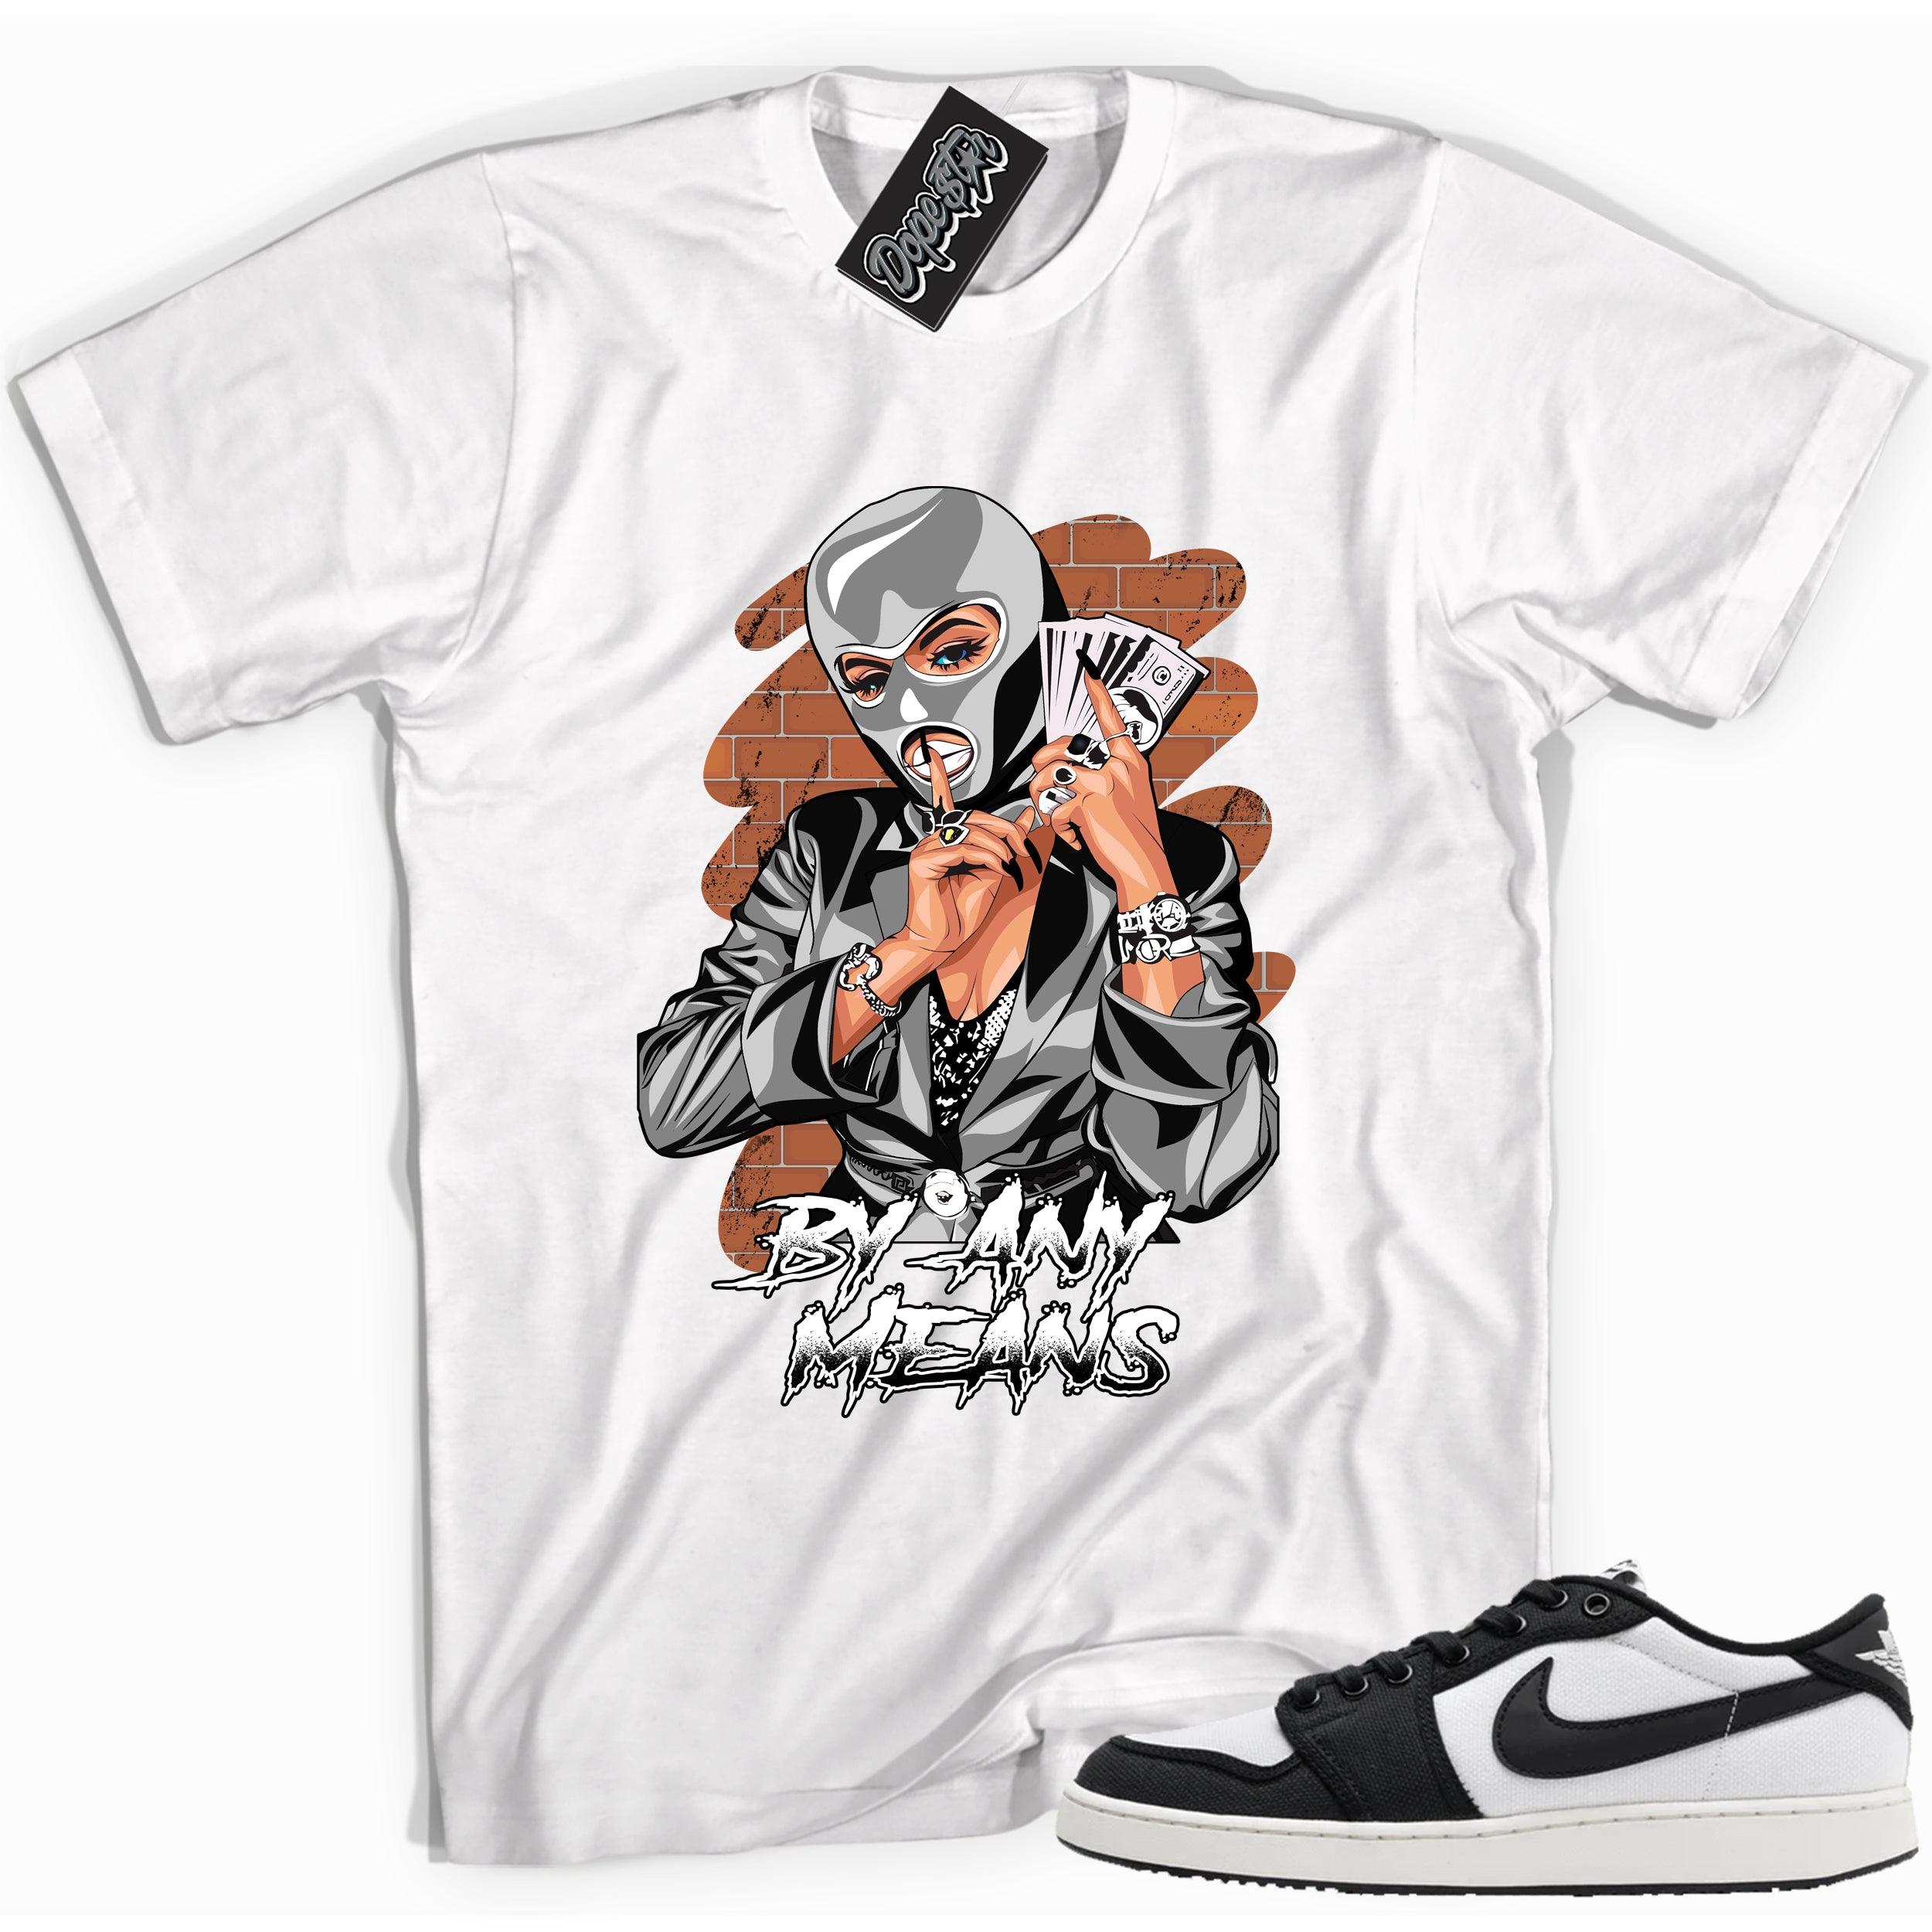 Cool white graphic tee with 'by any means' print, that perfectly matches Air Jordan 1 Retro Ajko Low Black & White sneakers.